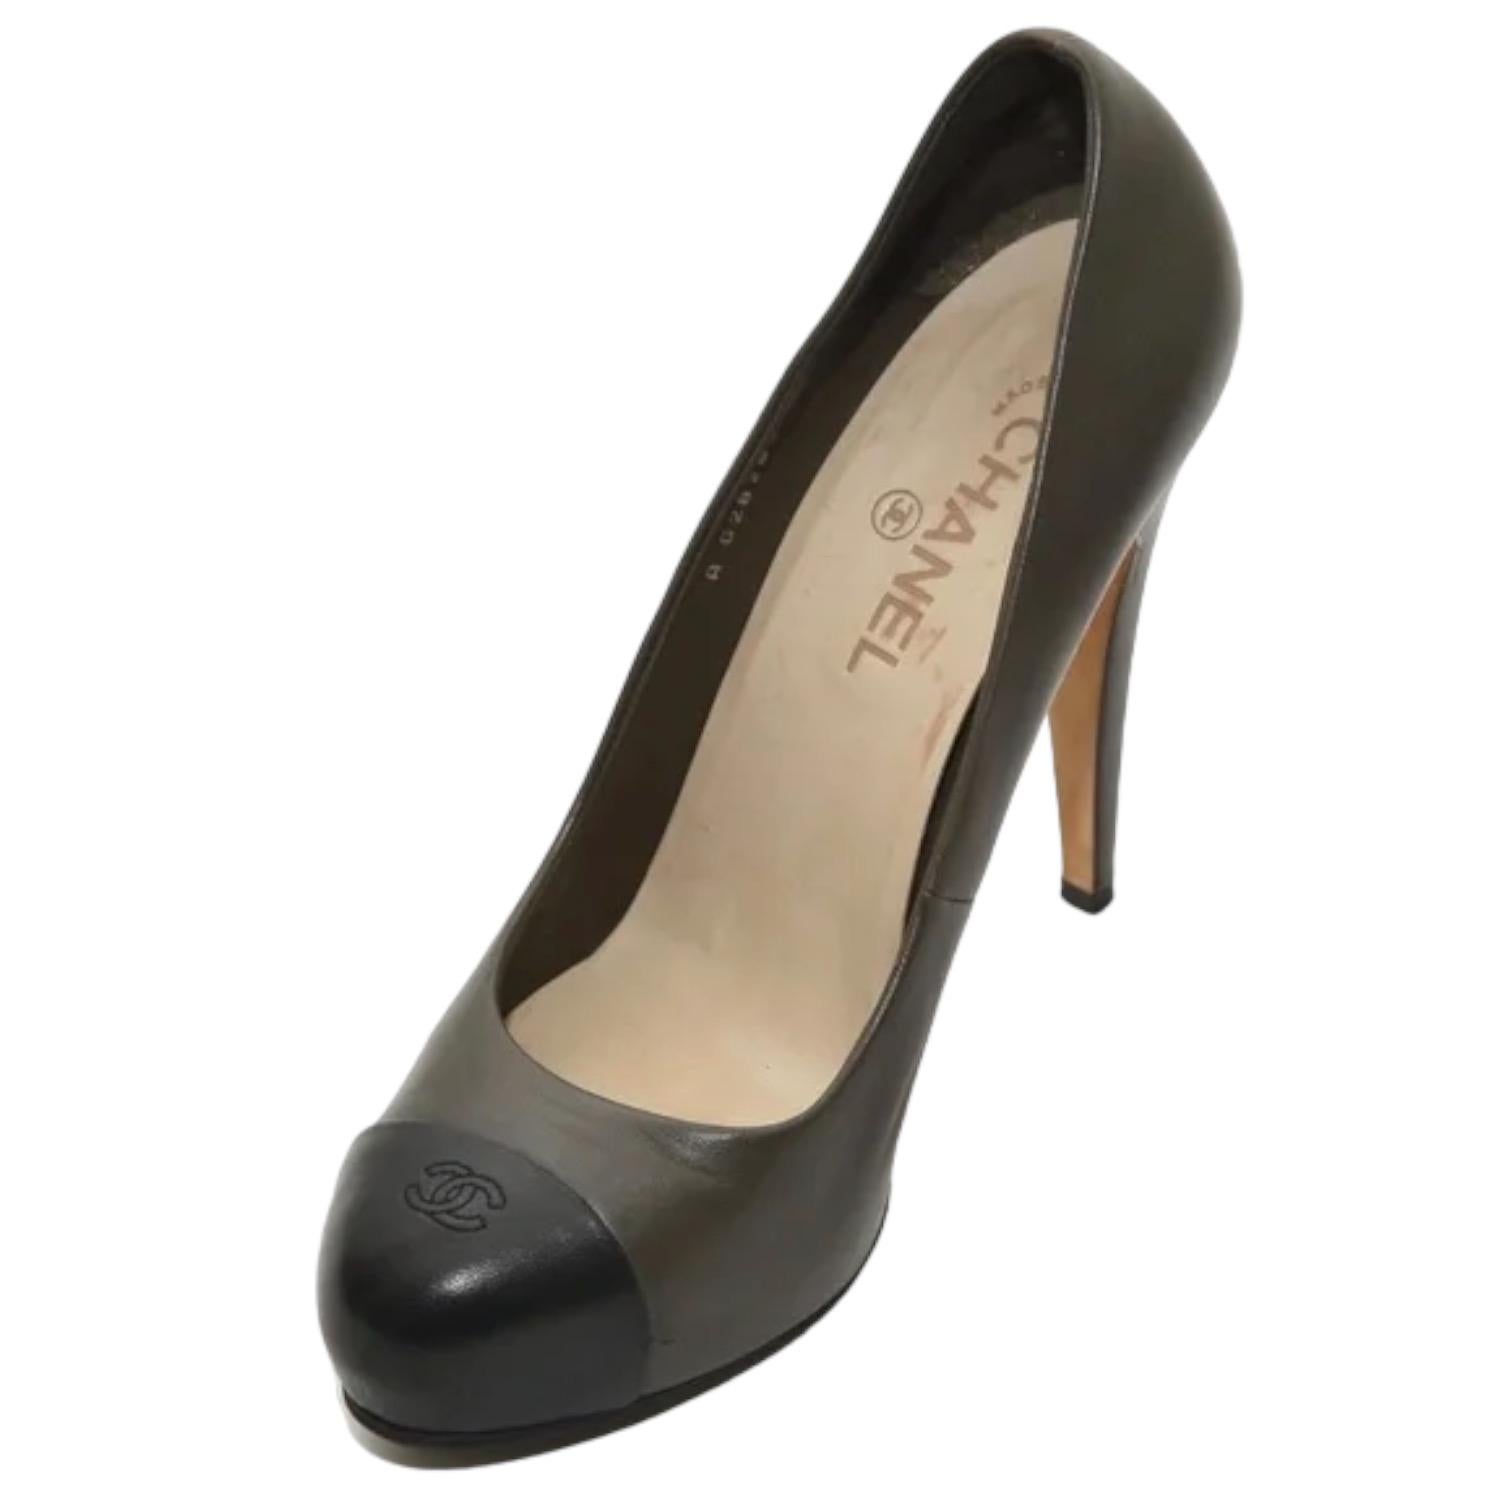 CHANEL Platform Pumps Dark Grey Black Leather Heels Shoes CC Cap Toe Sz 41 In Fair Condition For Sale In Hollywood, FL